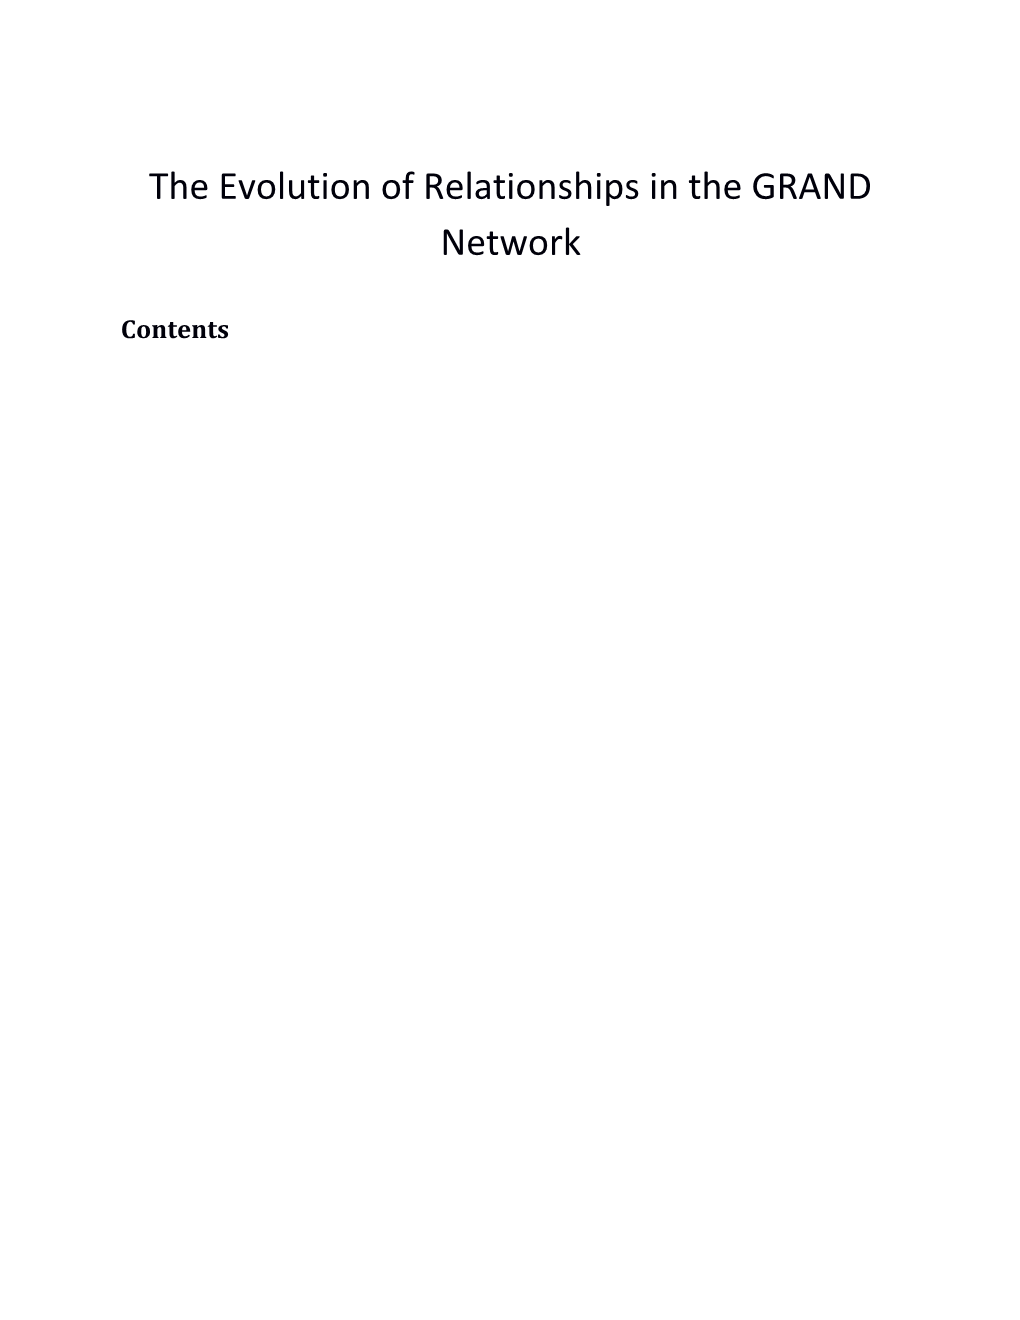 The Evolution of Relationships in the GRAND Network